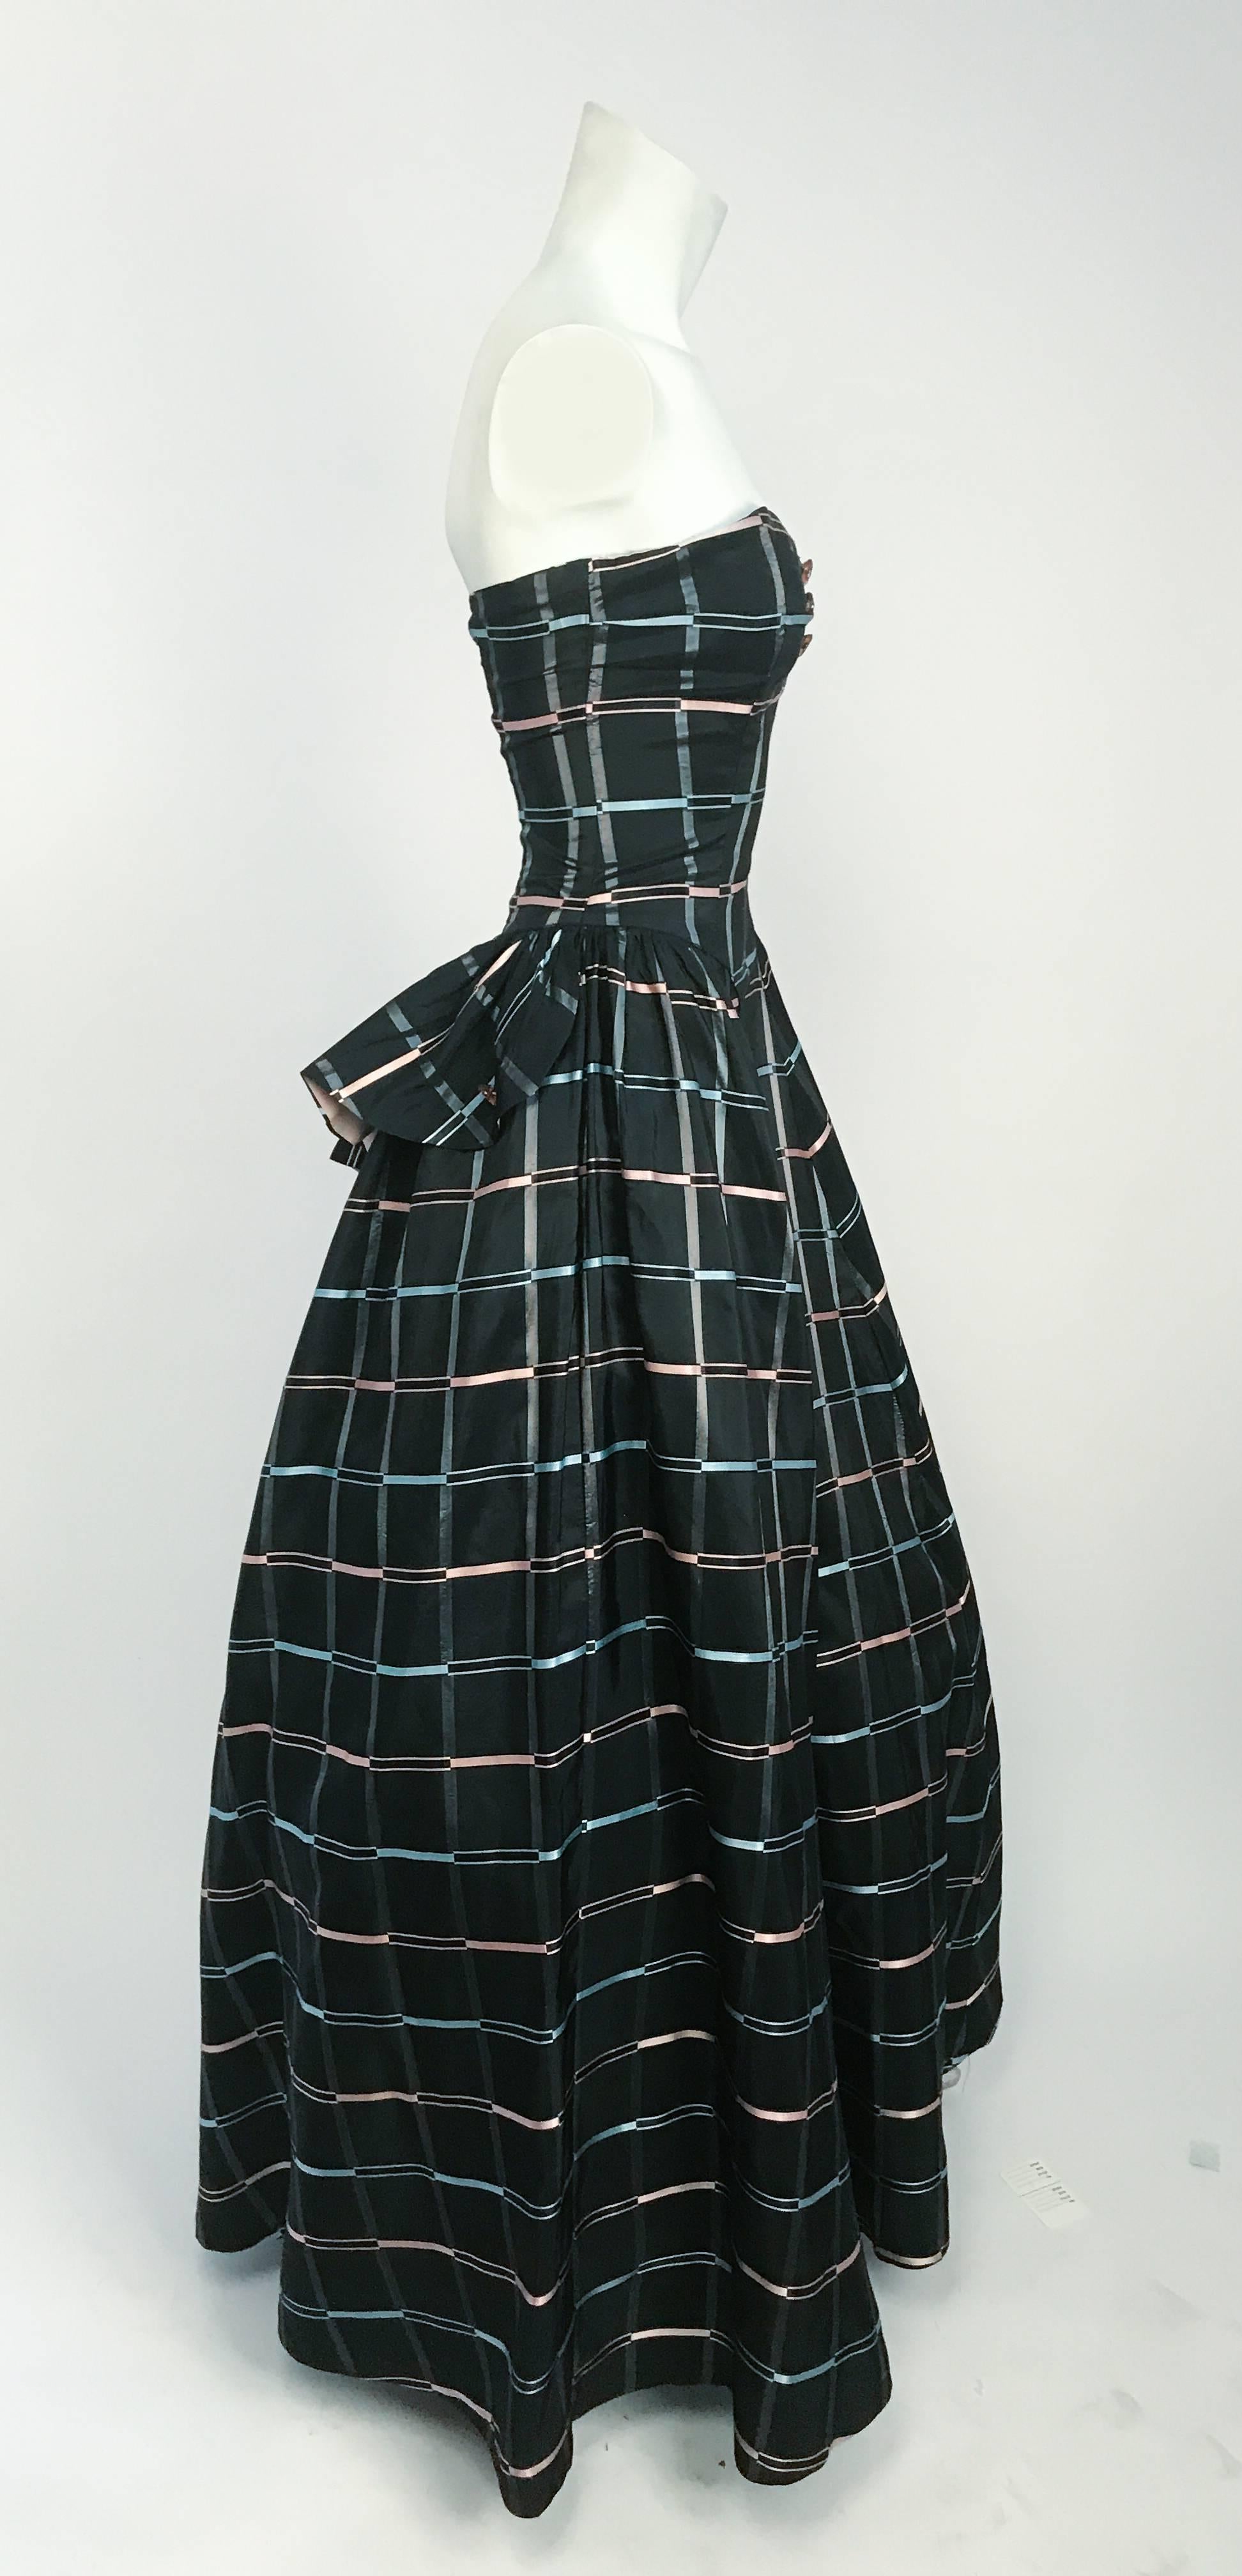 1945 Strapless Plaid Evening Dress. Black plaid dress with pink buttons with clear rhinestone center and peplum side accents. Garment shot over a petticoat on.